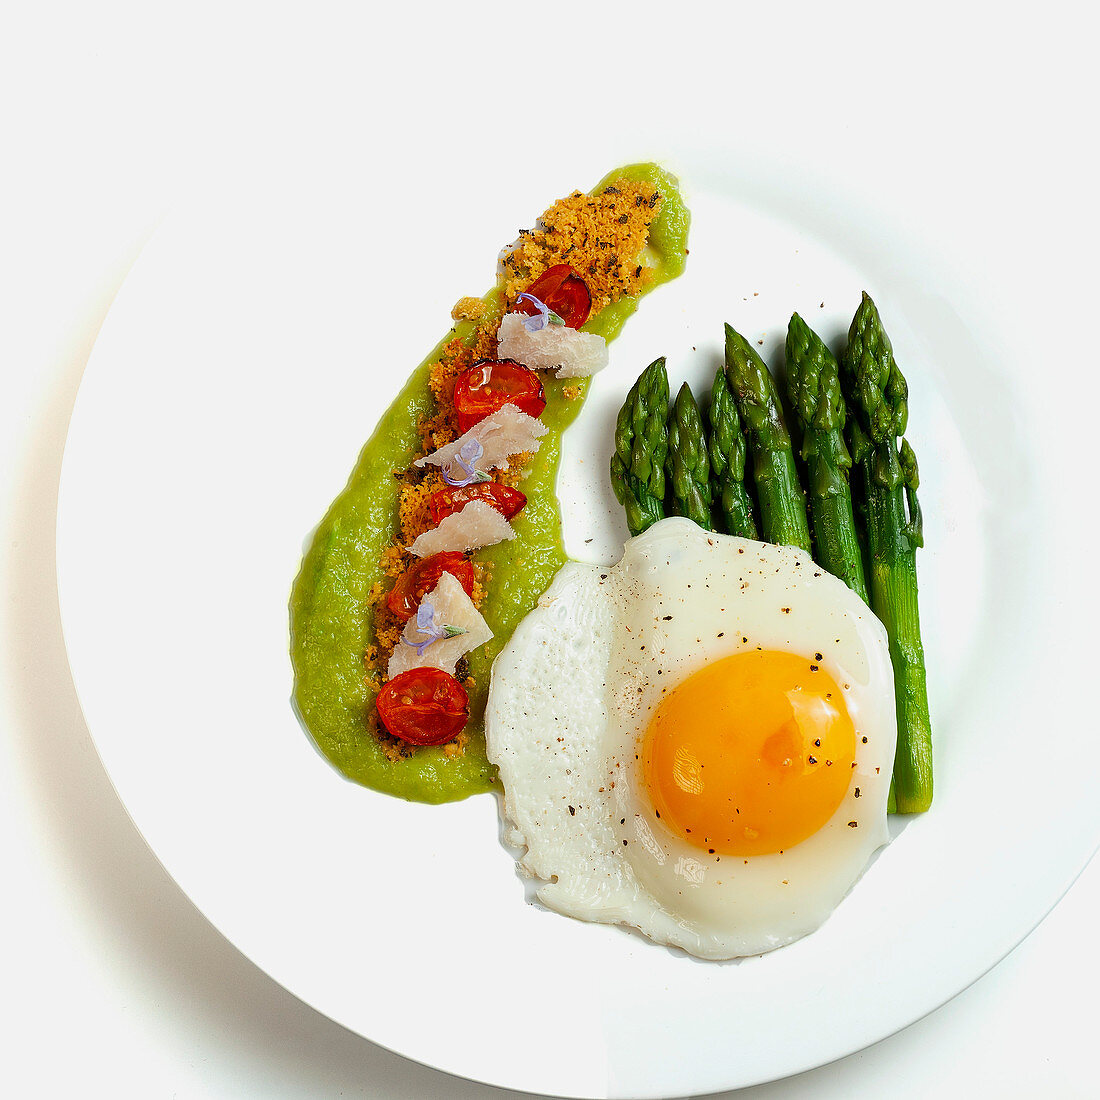 Green asparagus with fried egg, asparagus cream and confit tomatoes